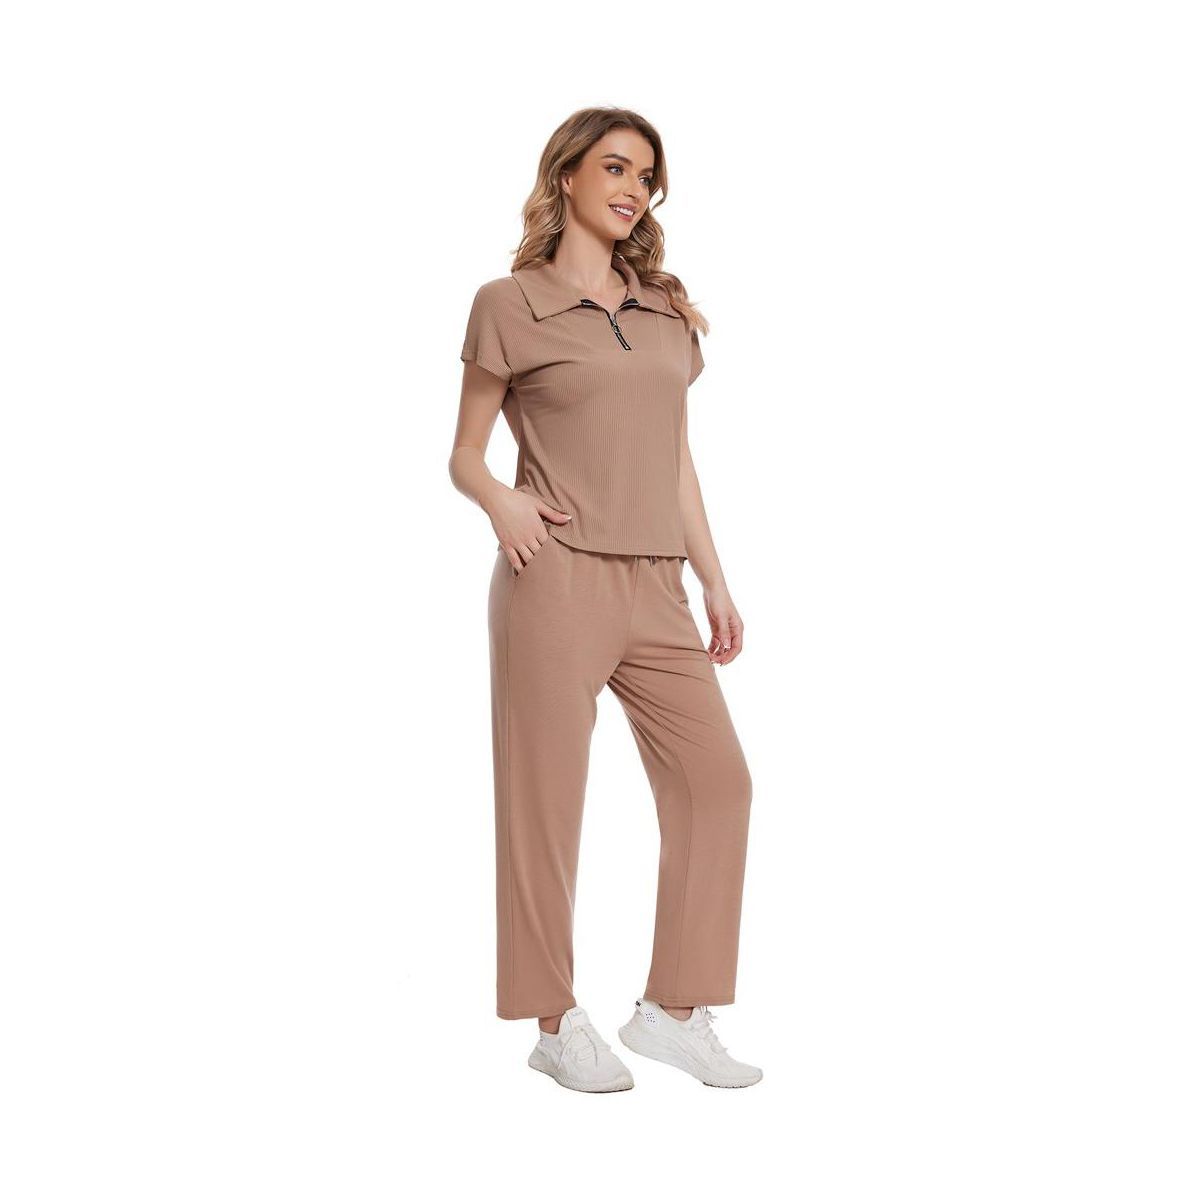 Summer 2 Piece Outfits for Women Casual Sweatsuits Short Sleeve V Neck Tops with Crop Long Pants | Target